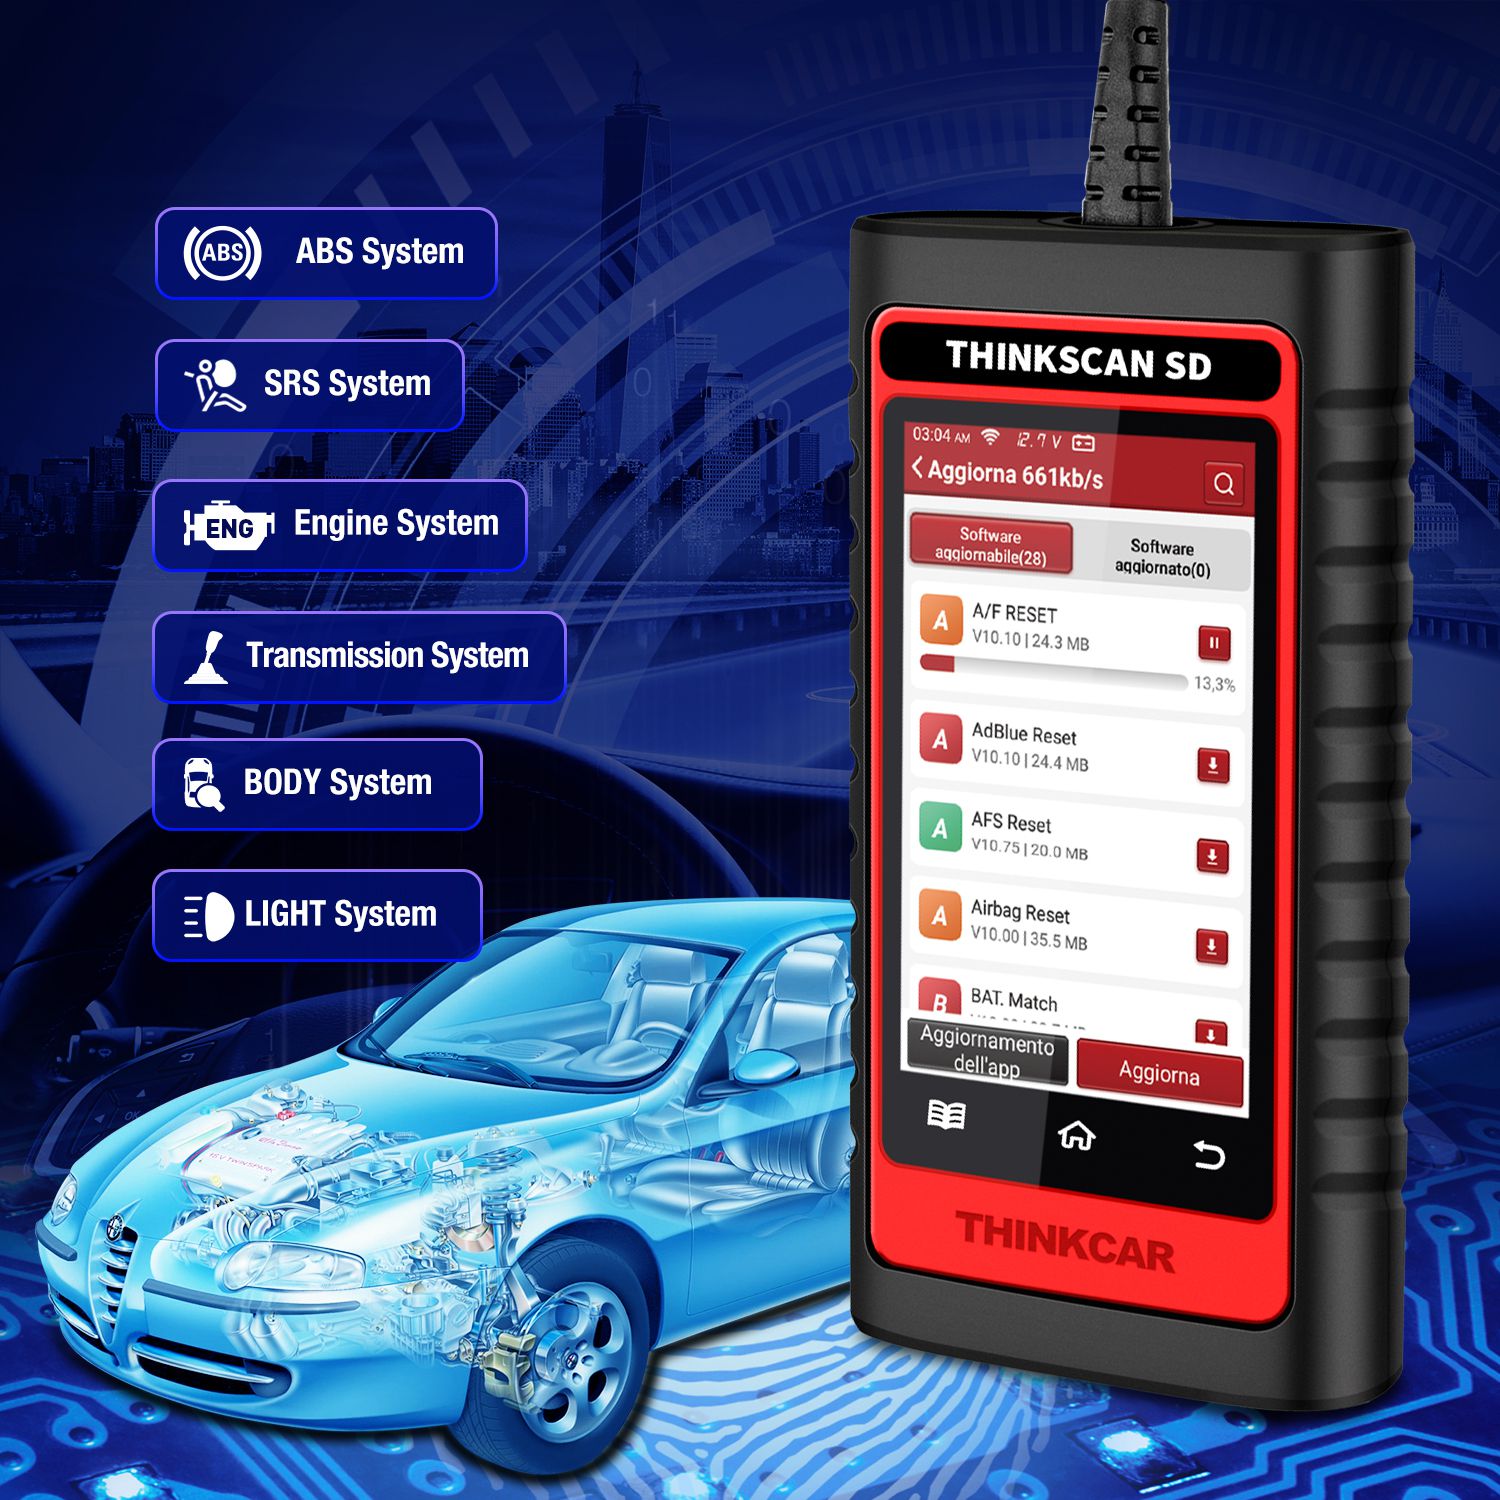 Thinkcar thinkscan SD2 OBD2 Automotive scanner ABS SRS Professional Diagnosis Tool full System Free Update code reader